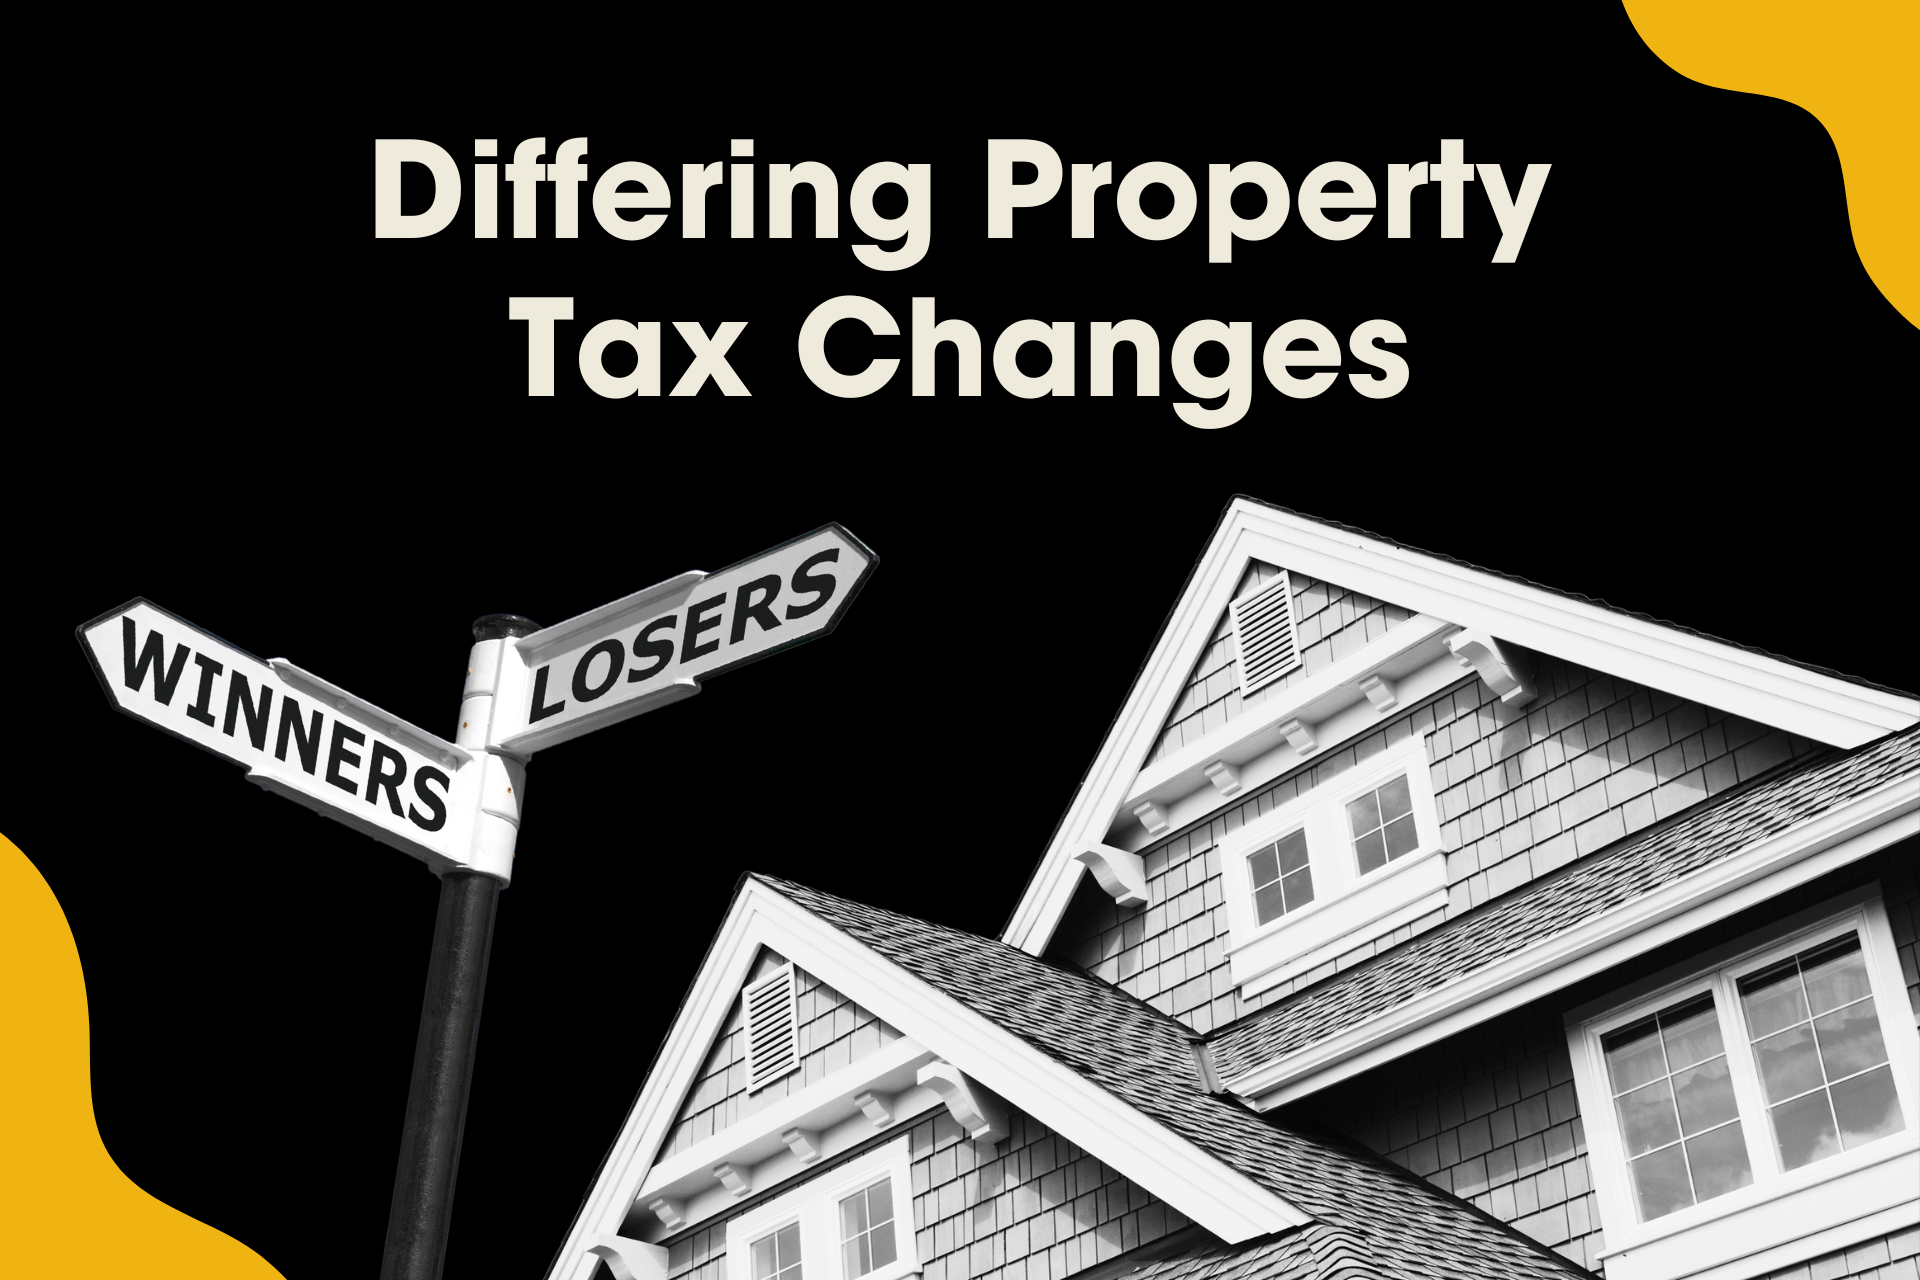 Exploring the impact of differing property tax modifications on homeowners.